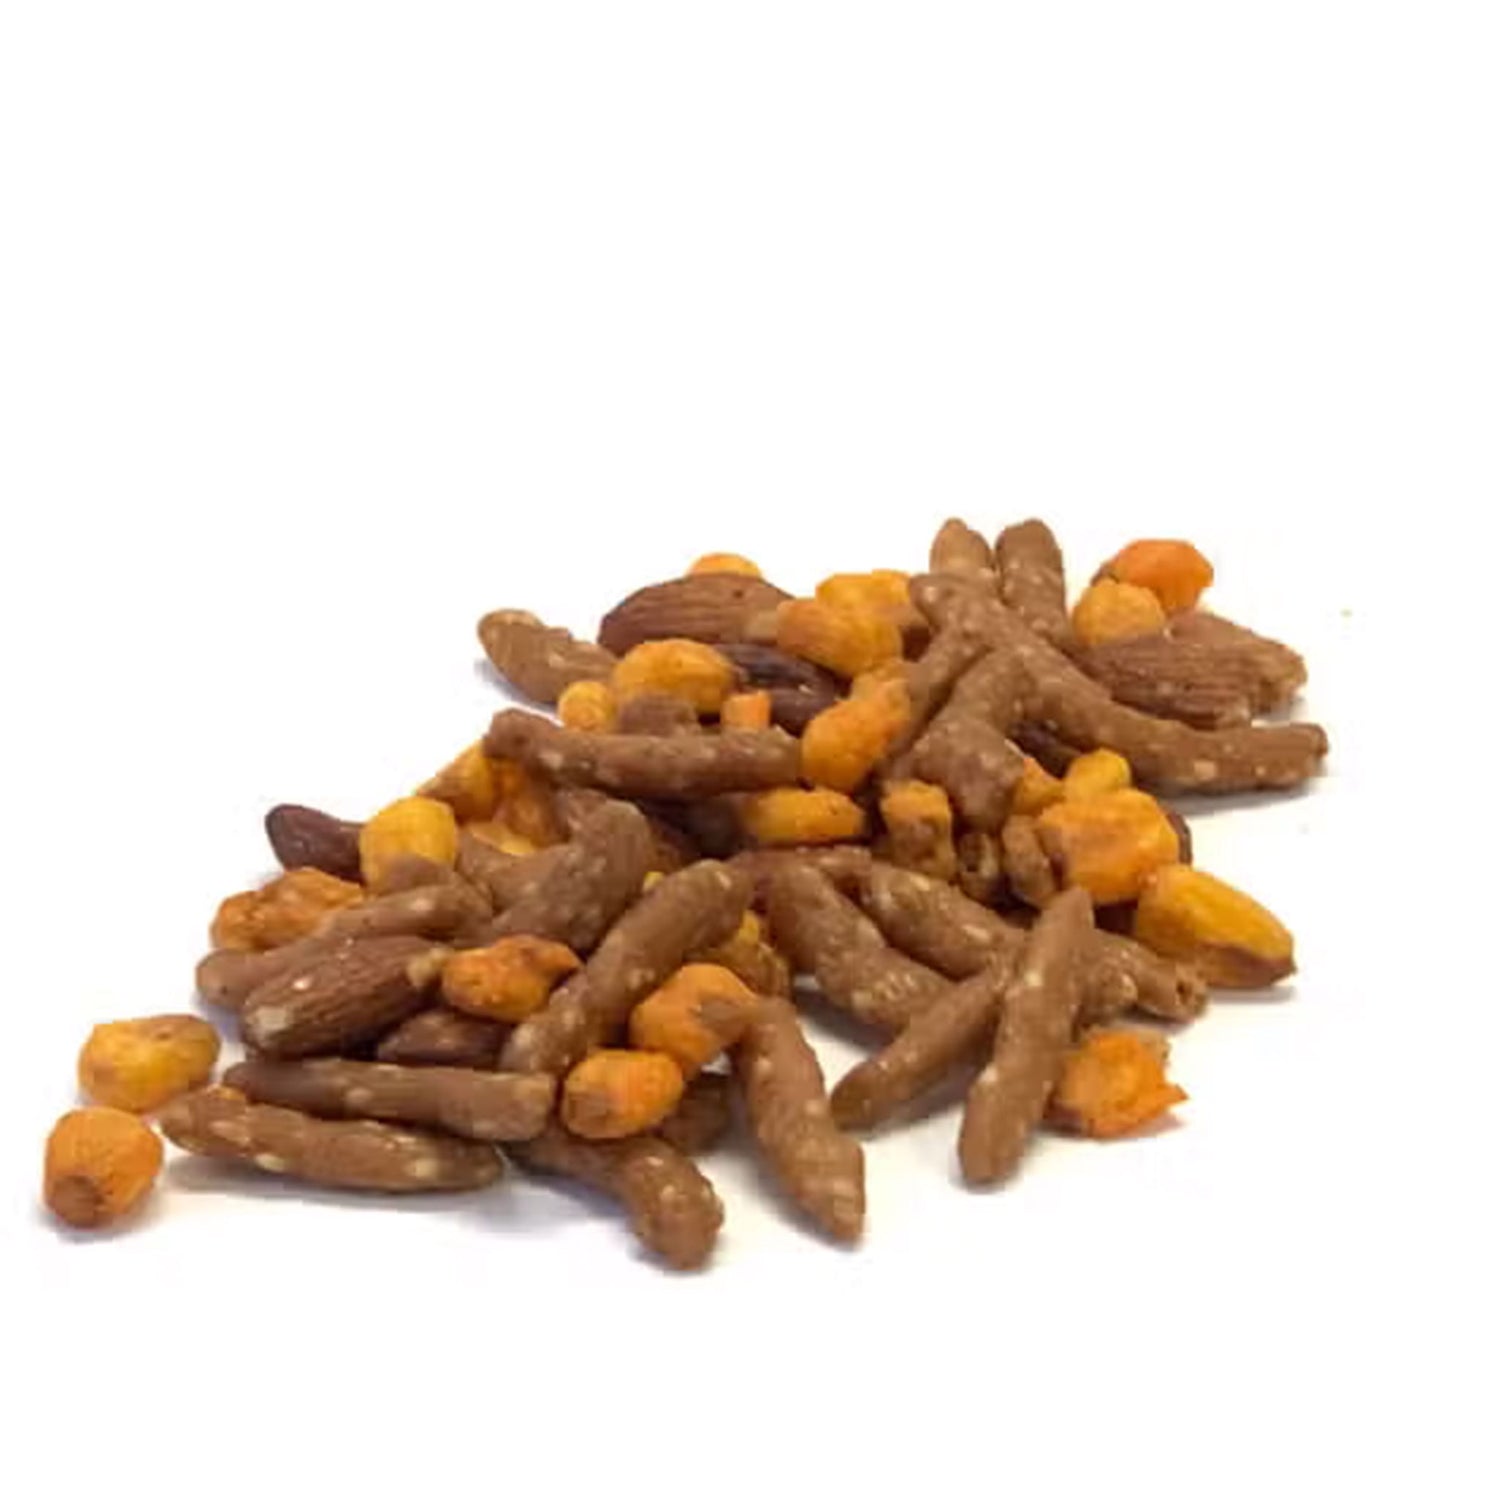 Sweet &amp; Spicy Trail Mix